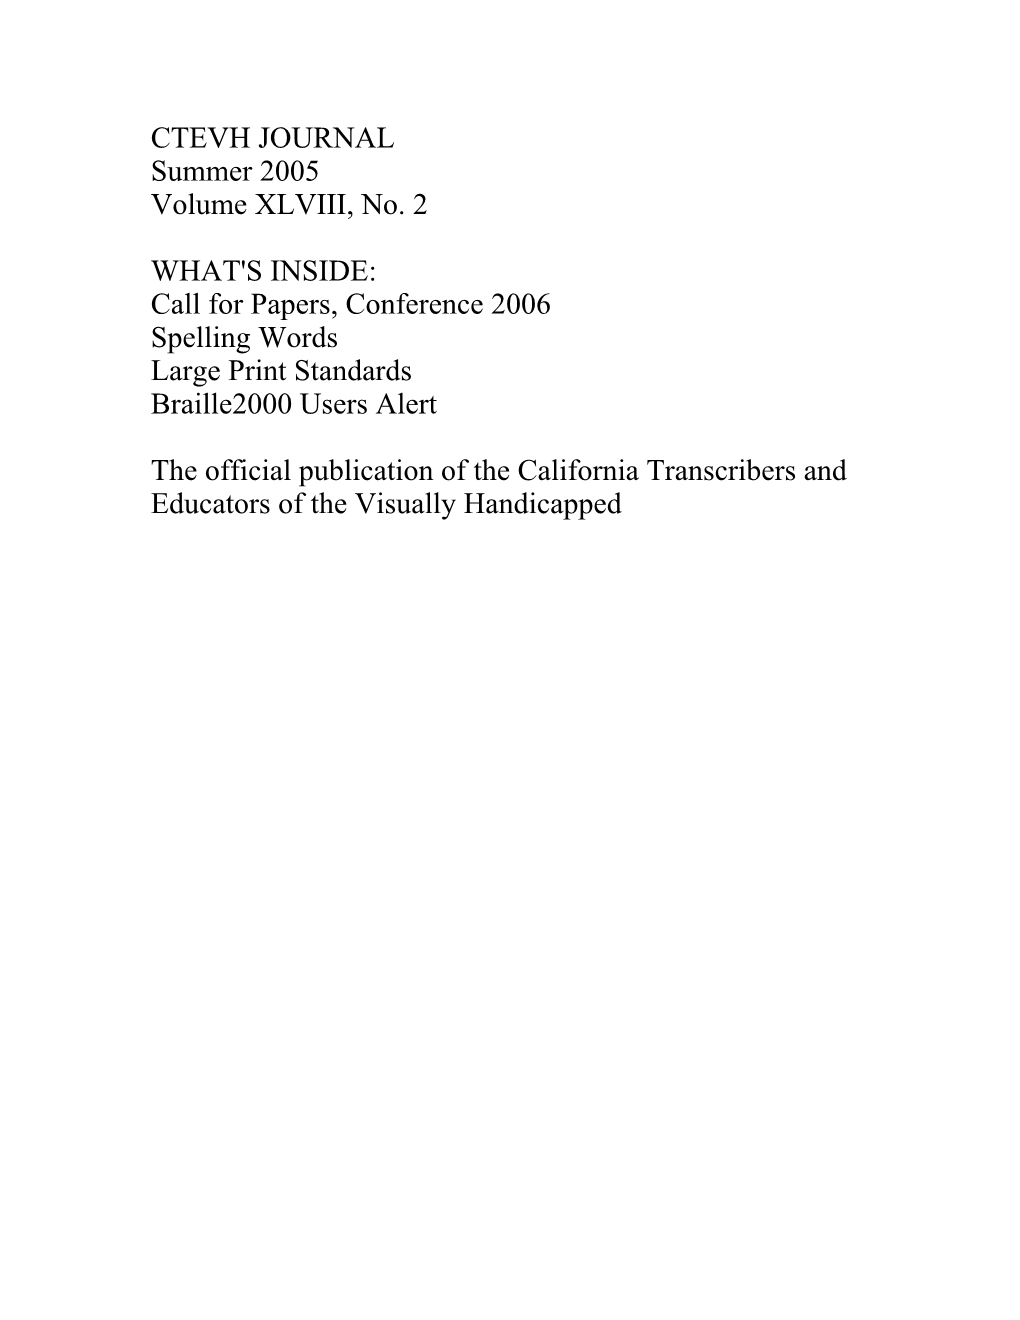 Call for Papers, Conference 2006 s1